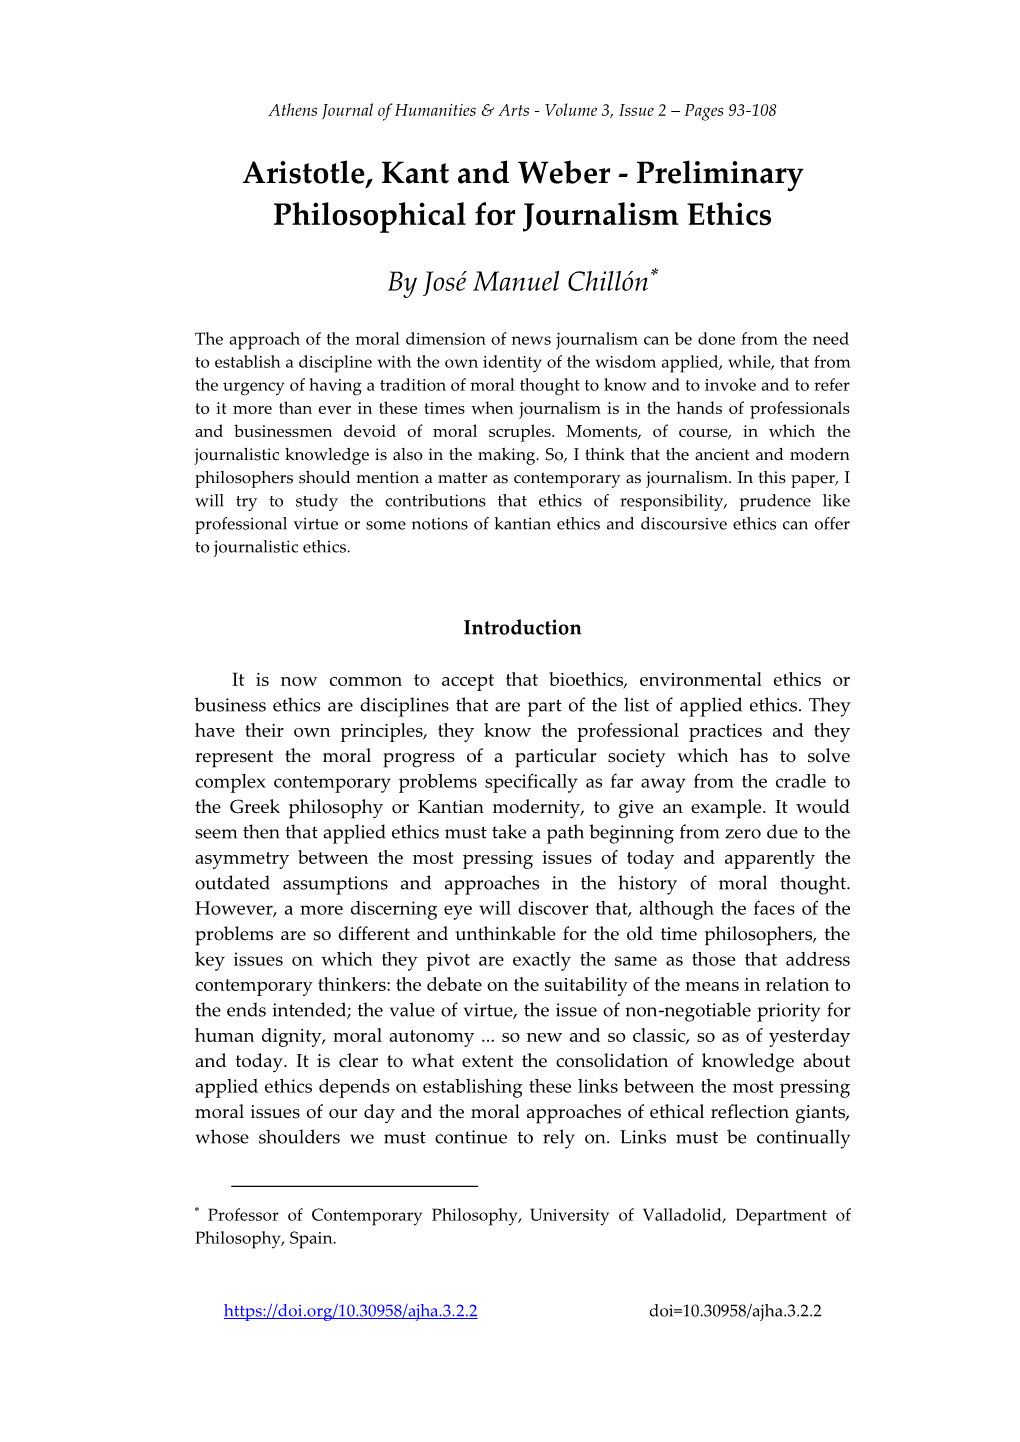 Aristotle, Kant and Weber - Preliminary Philosophical for Journalism Ethics